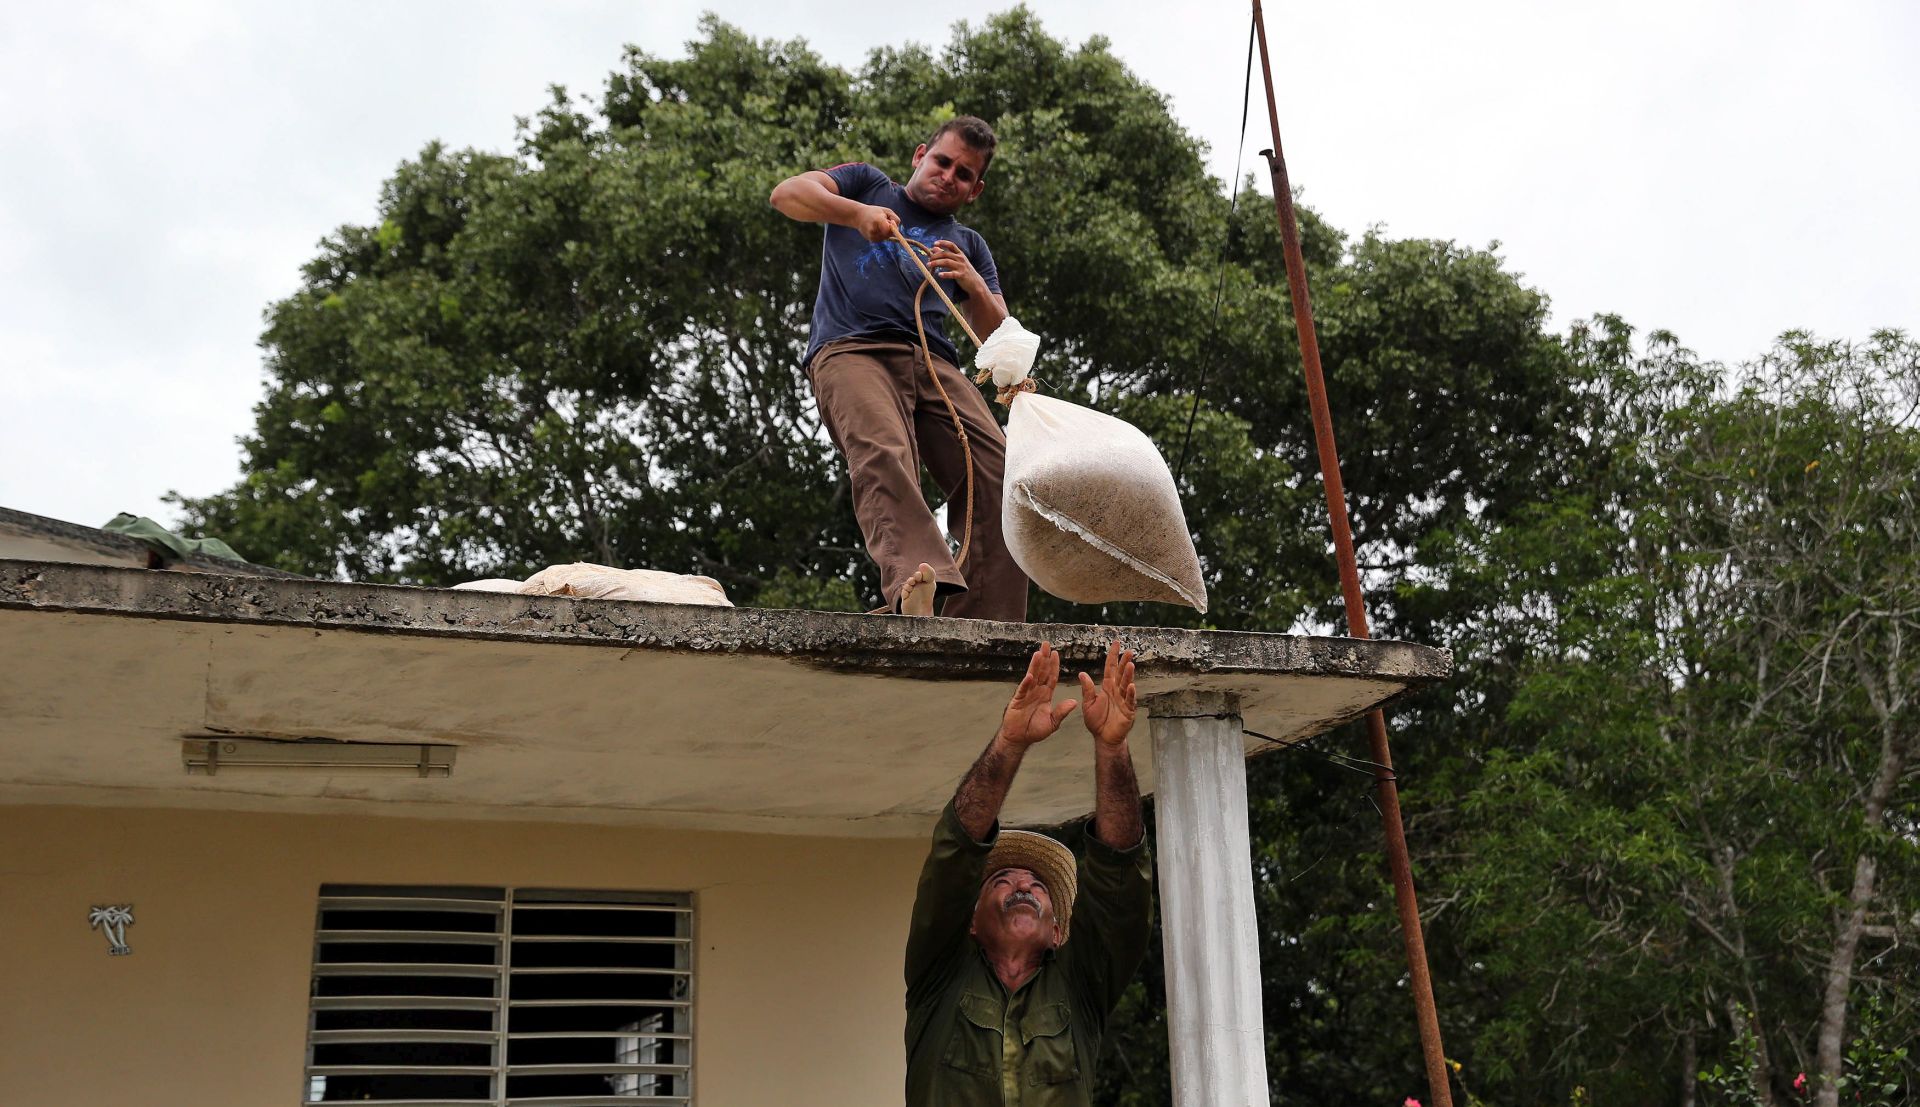 epa06192999 Two men reinforce the roof of a house with sandbags  in preparation for the arrival of Hurricane Irma, in the town of Turiguano, in the province of Ciego de Avila, Cuba, 08 September 2017.   A second hurricane, Jose, may also threaten the area.  EPA/ALejandro Ernesto